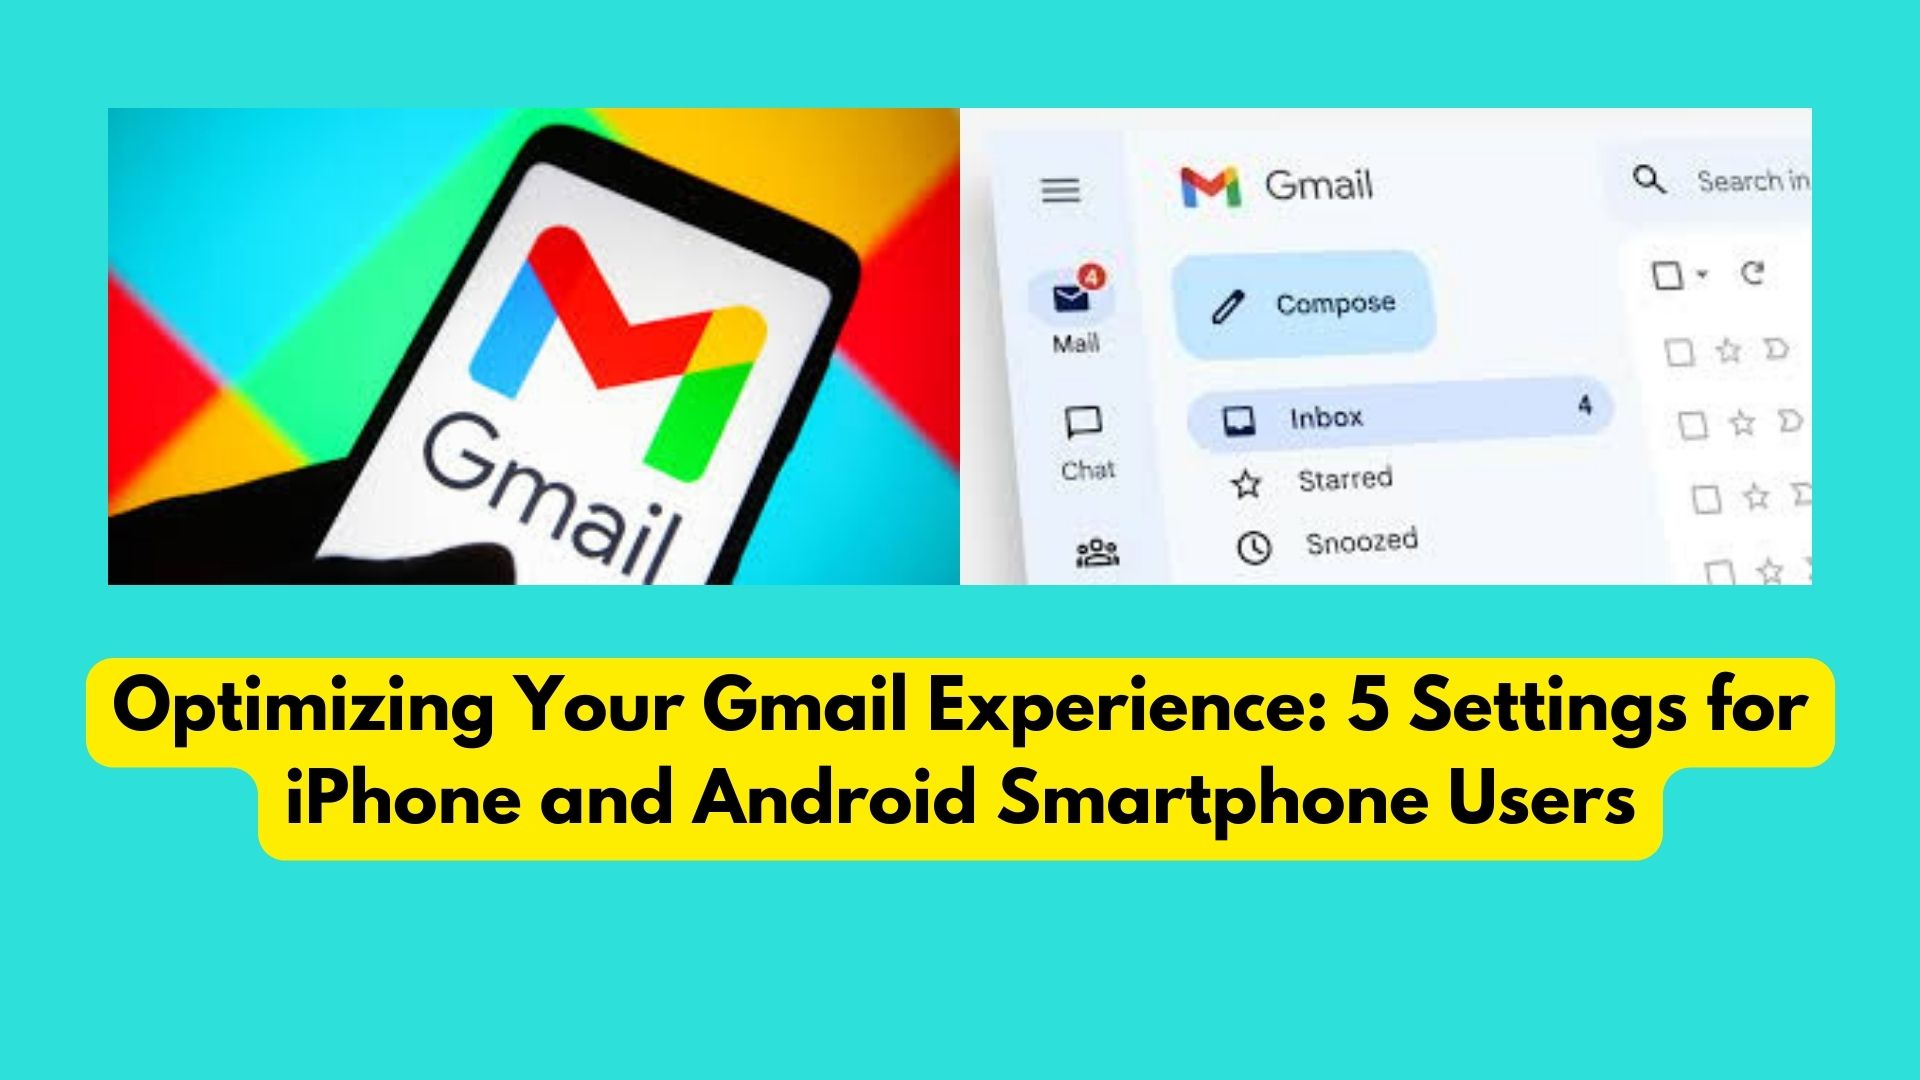 Optimizing Your Gmail Experience: 5 Settings for iPhone and Android Smartphone Users